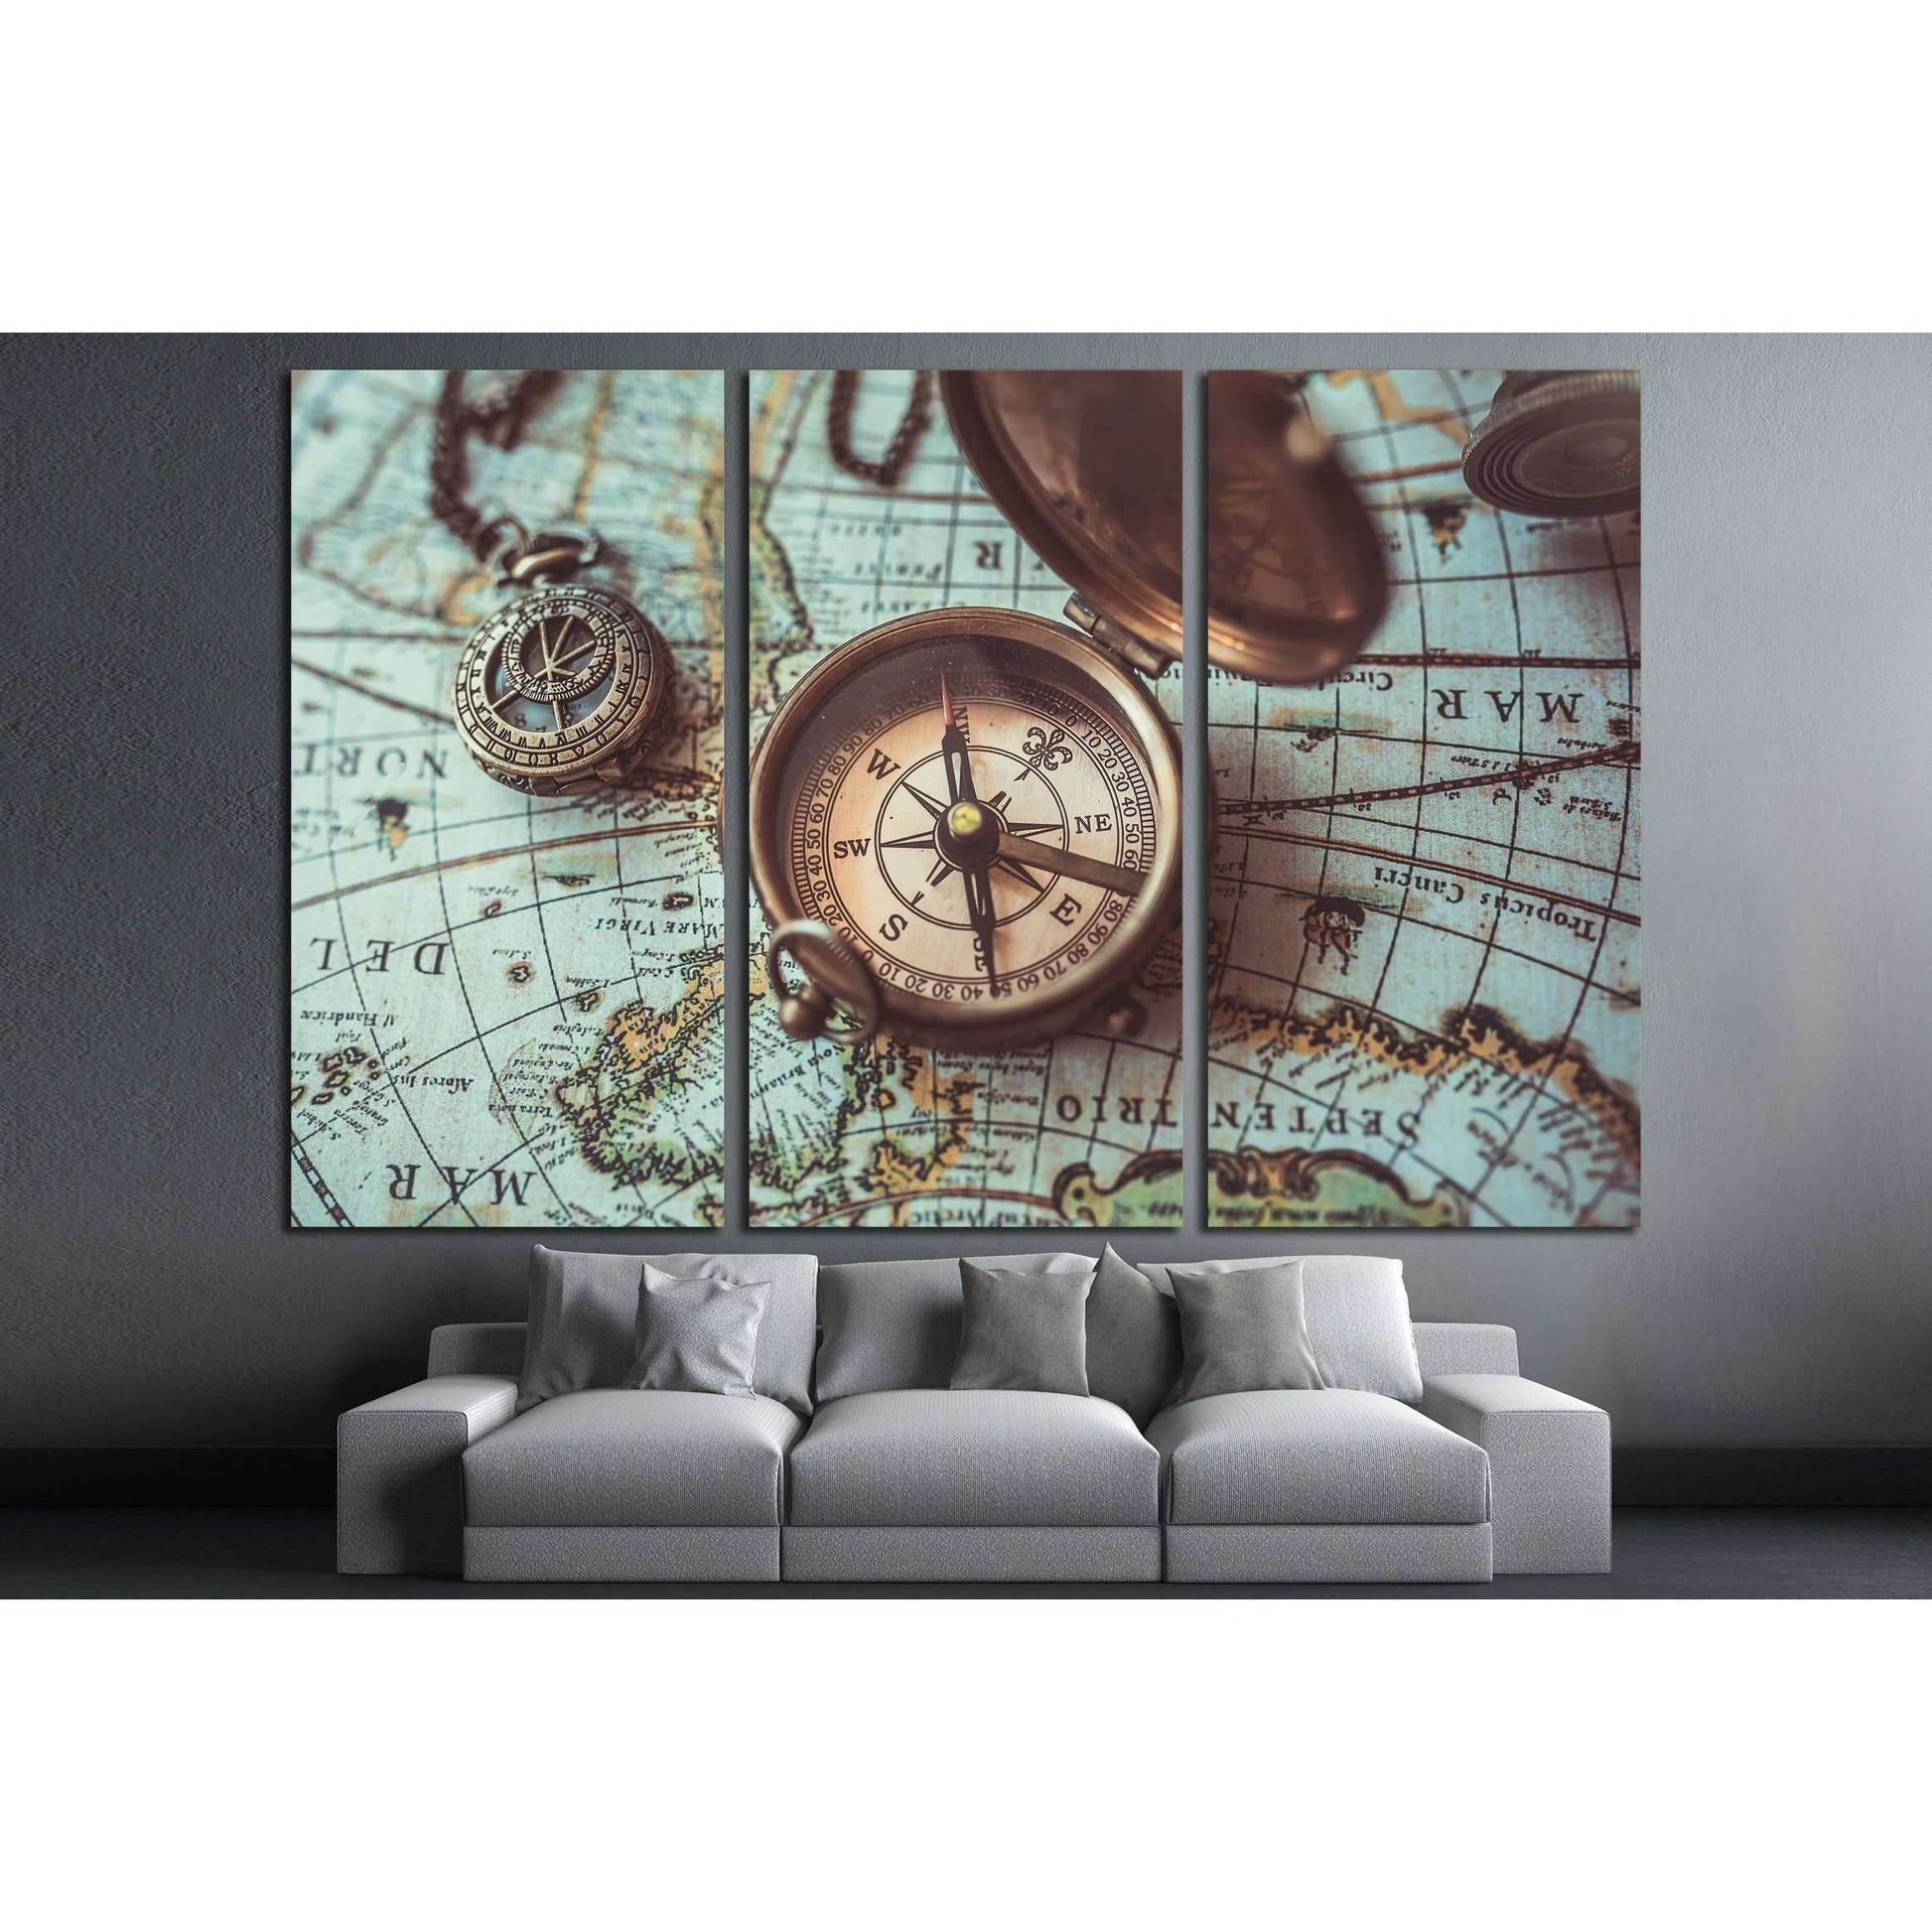 Antique bronze emblem compass, mini compass necklace pendant and binocular telescopes №2818 Ready to Hang Canvas PrintCanvas art arrives ready to hang, with hanging accessories included and no additional framing required. Every canvas print is hand-crafte